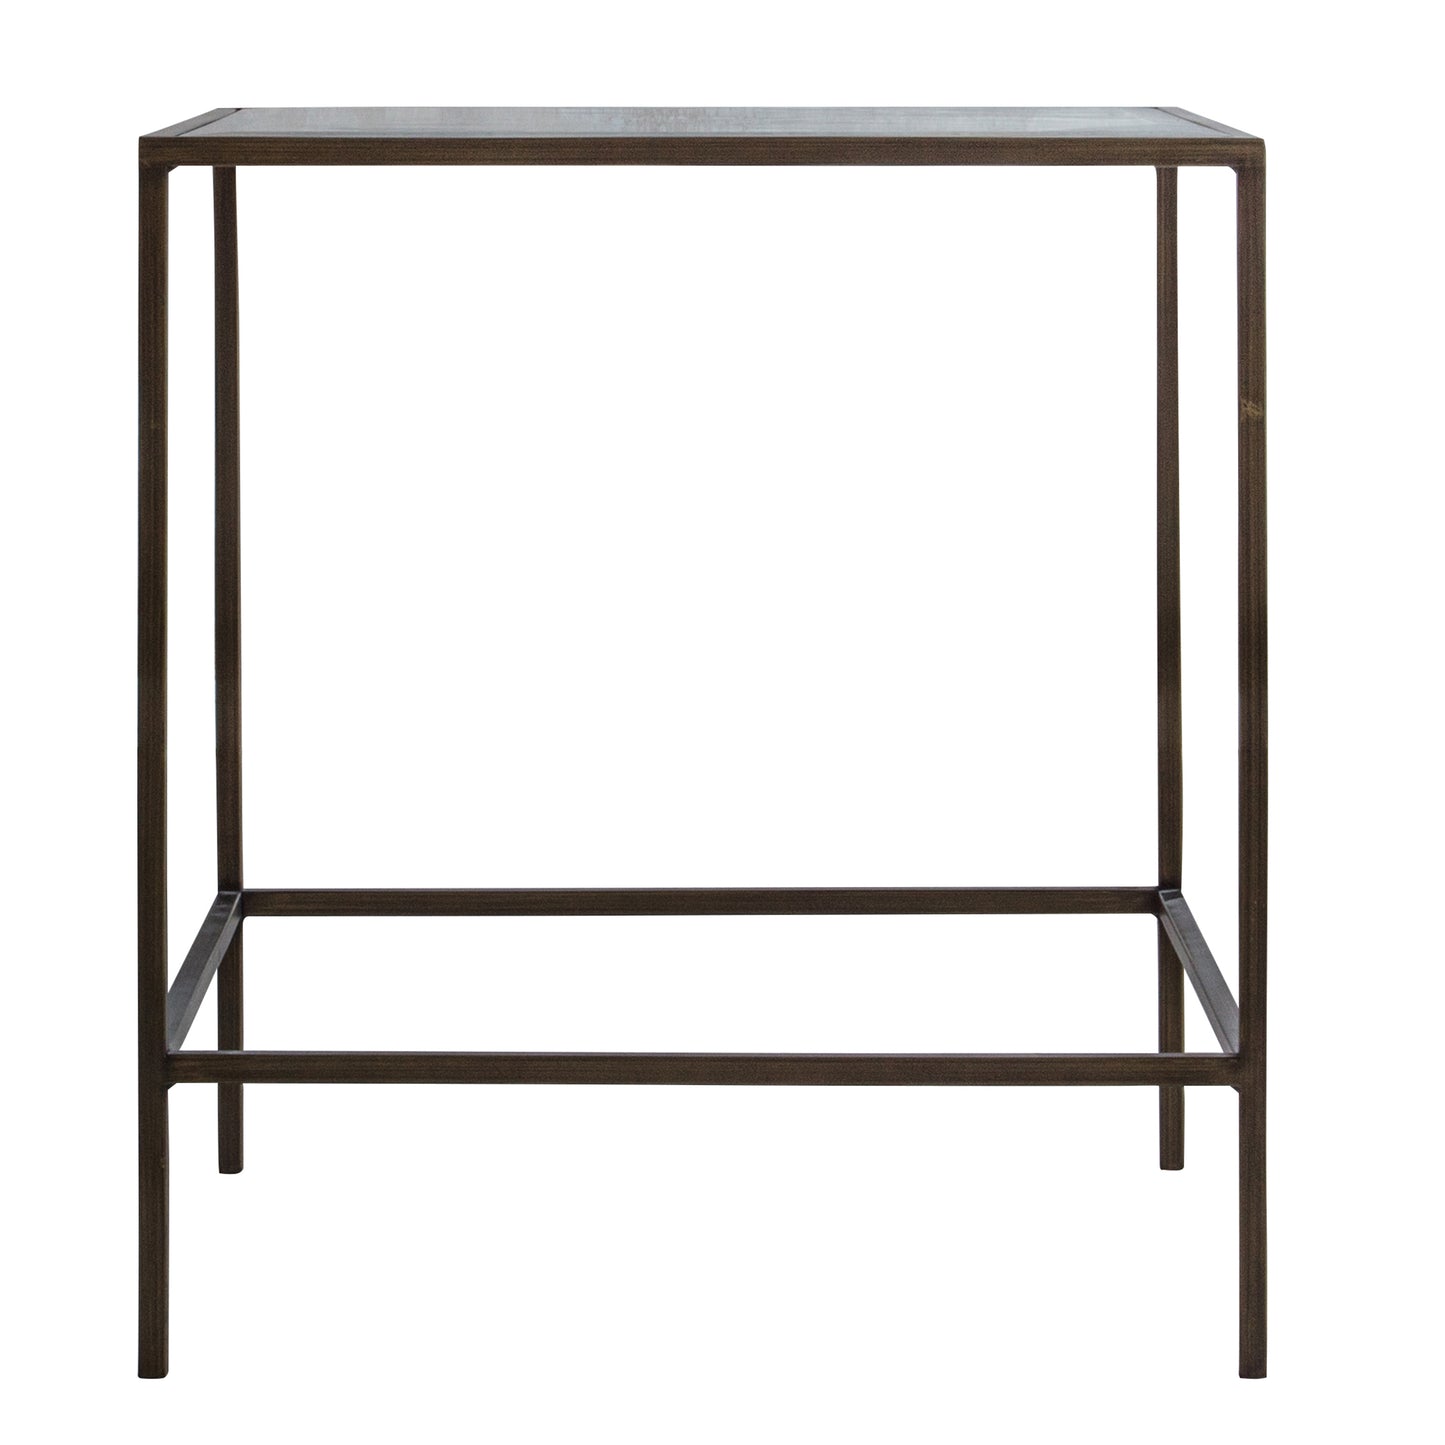 An Engleborne Side Table Bronze 500x500x550mm from Kikiathome.co.uk, perfect for interior decor.